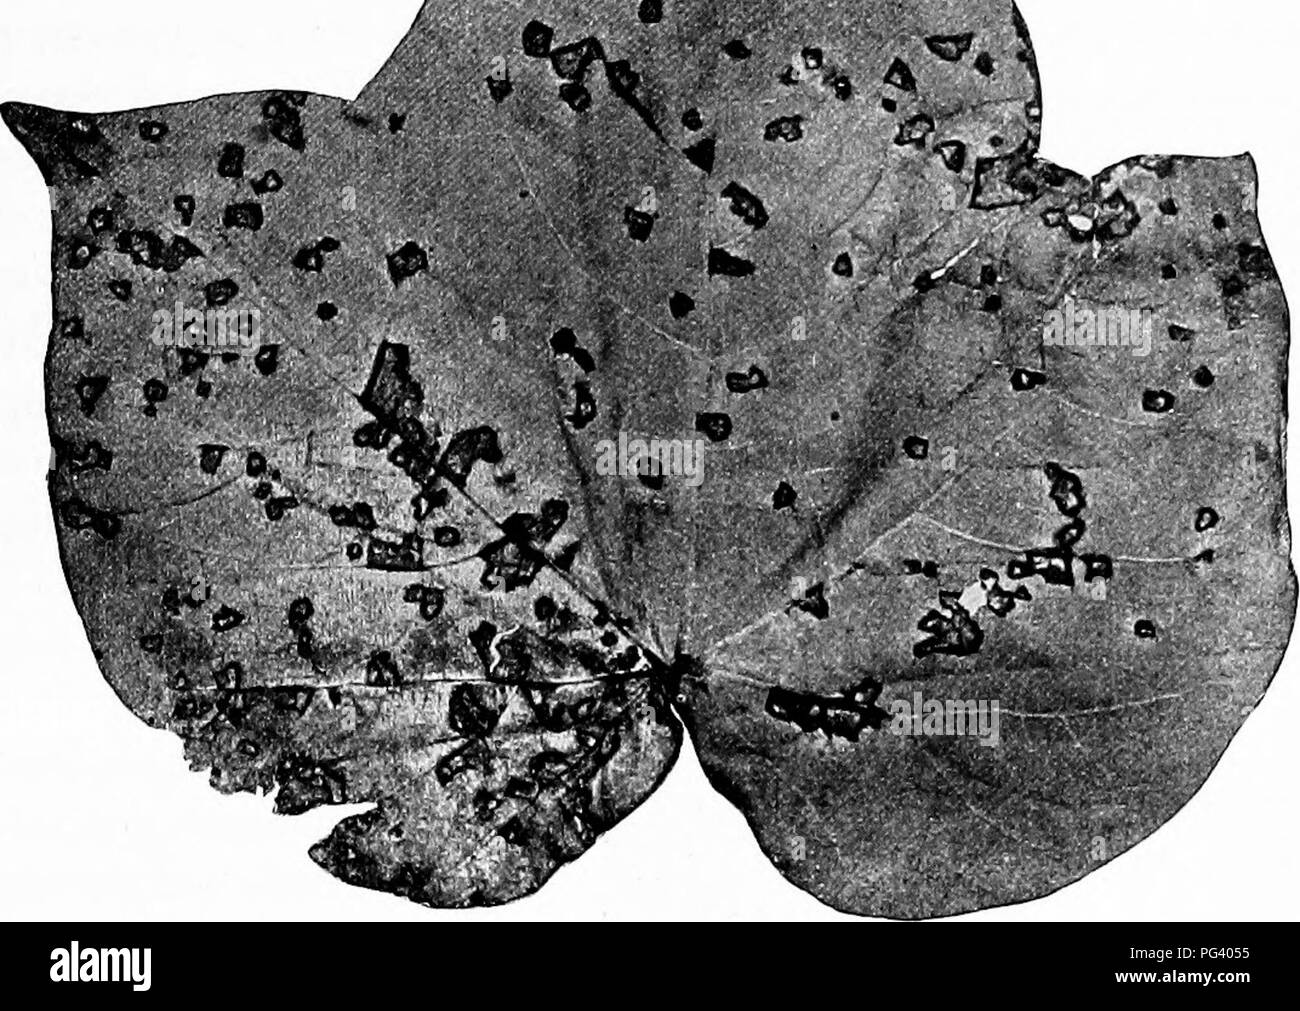 . Fungous diseases of plants : with chapters on physiology, culture methods and technique . Fungi in agriculture. ^sr^C:. Fig. 30. Angular Leaf Spot of Cotton. (Photograph by Erwin F. Smith) spots turn purple and finally become dry and brown. The disease is apparently widely distributed in the southern states, but the organism has not yet been fully described.1 X. PEAR BLIGHT Bacillus amylovorus (Burrill) De Toni Arthur, J. C. Diseases of the Pear. N. Y. Agl. Exp. Sta. Rept. 3: 357-367. 1884. Arthur, J. C. History and Biology of Pear Blight. Proc. Phil. Acad. Nat. Sci. (1886): 322-341. pi. 3.  Stock Photo